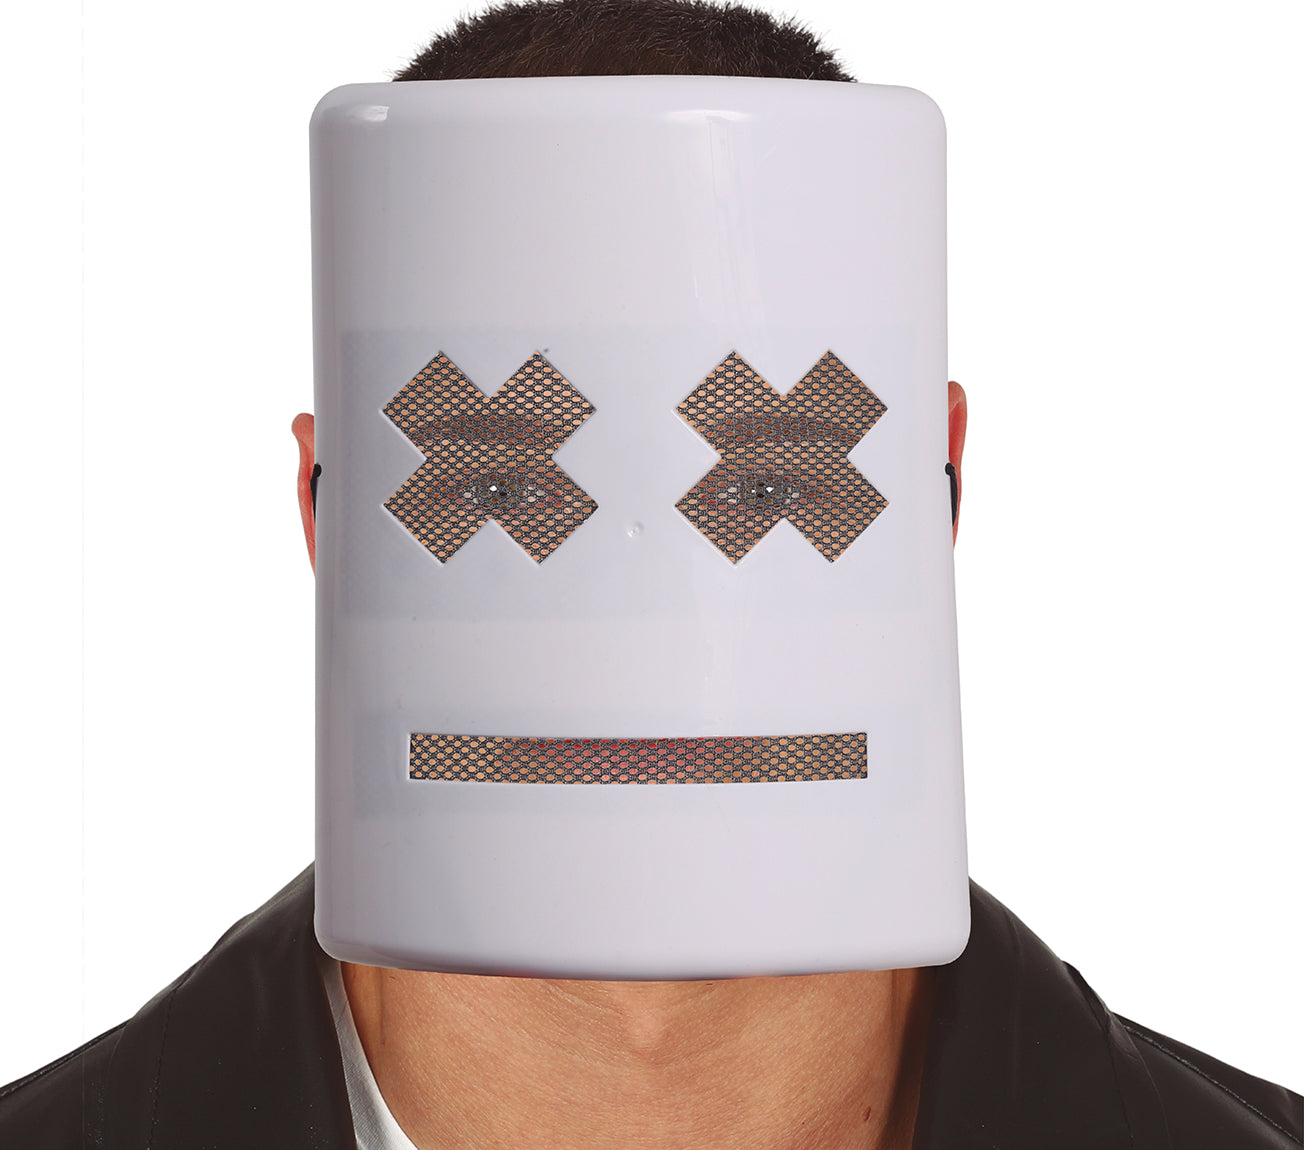 White Mask With Crosses